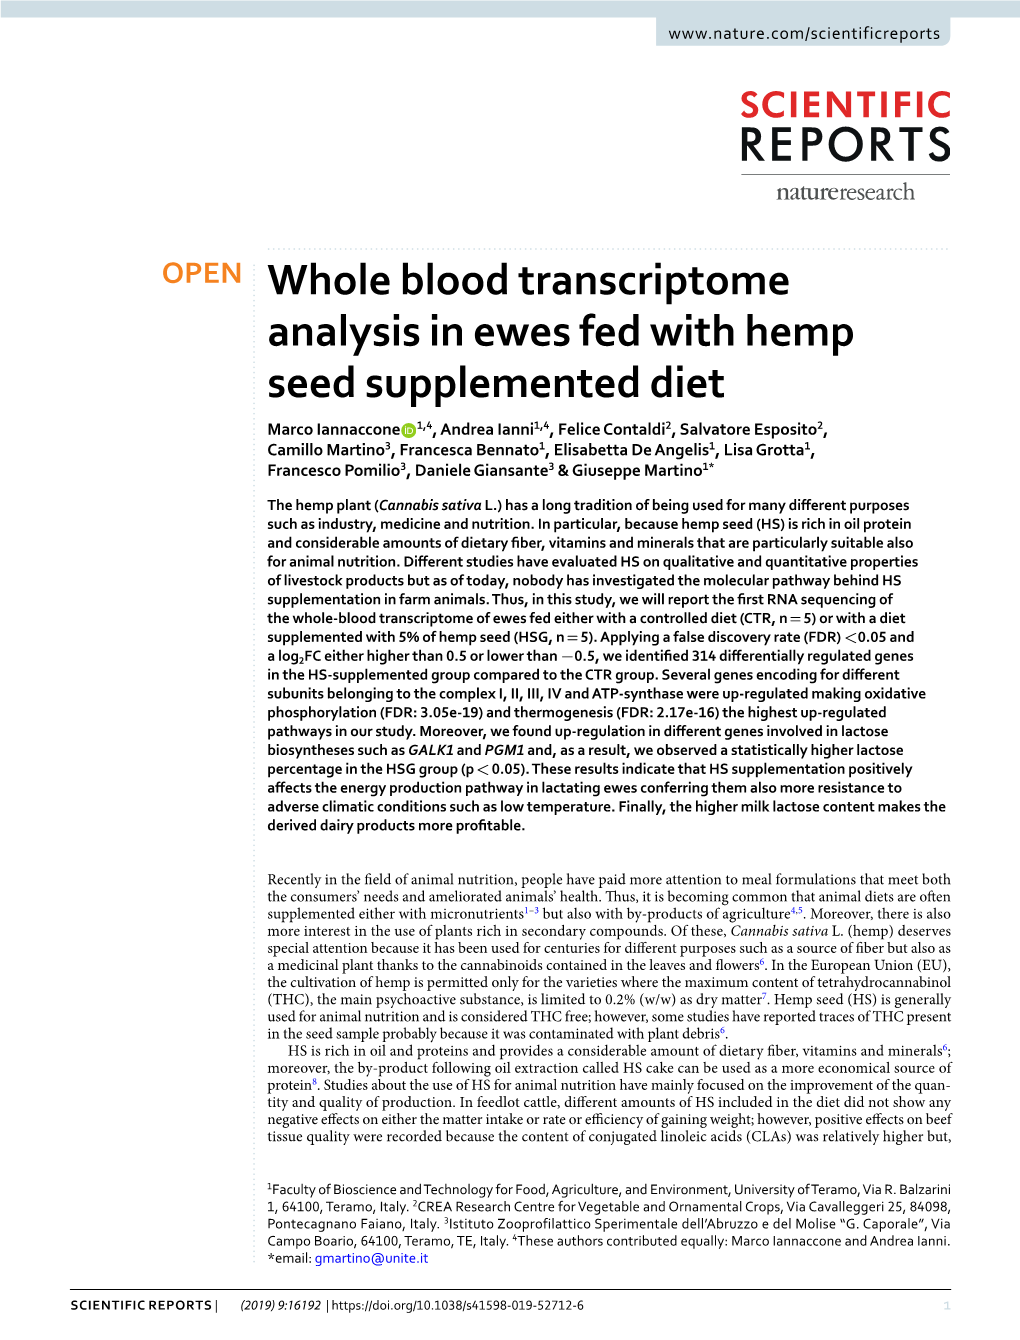 Whole Blood Transcriptome Analysis in Ewes Fed with Hemp Seed